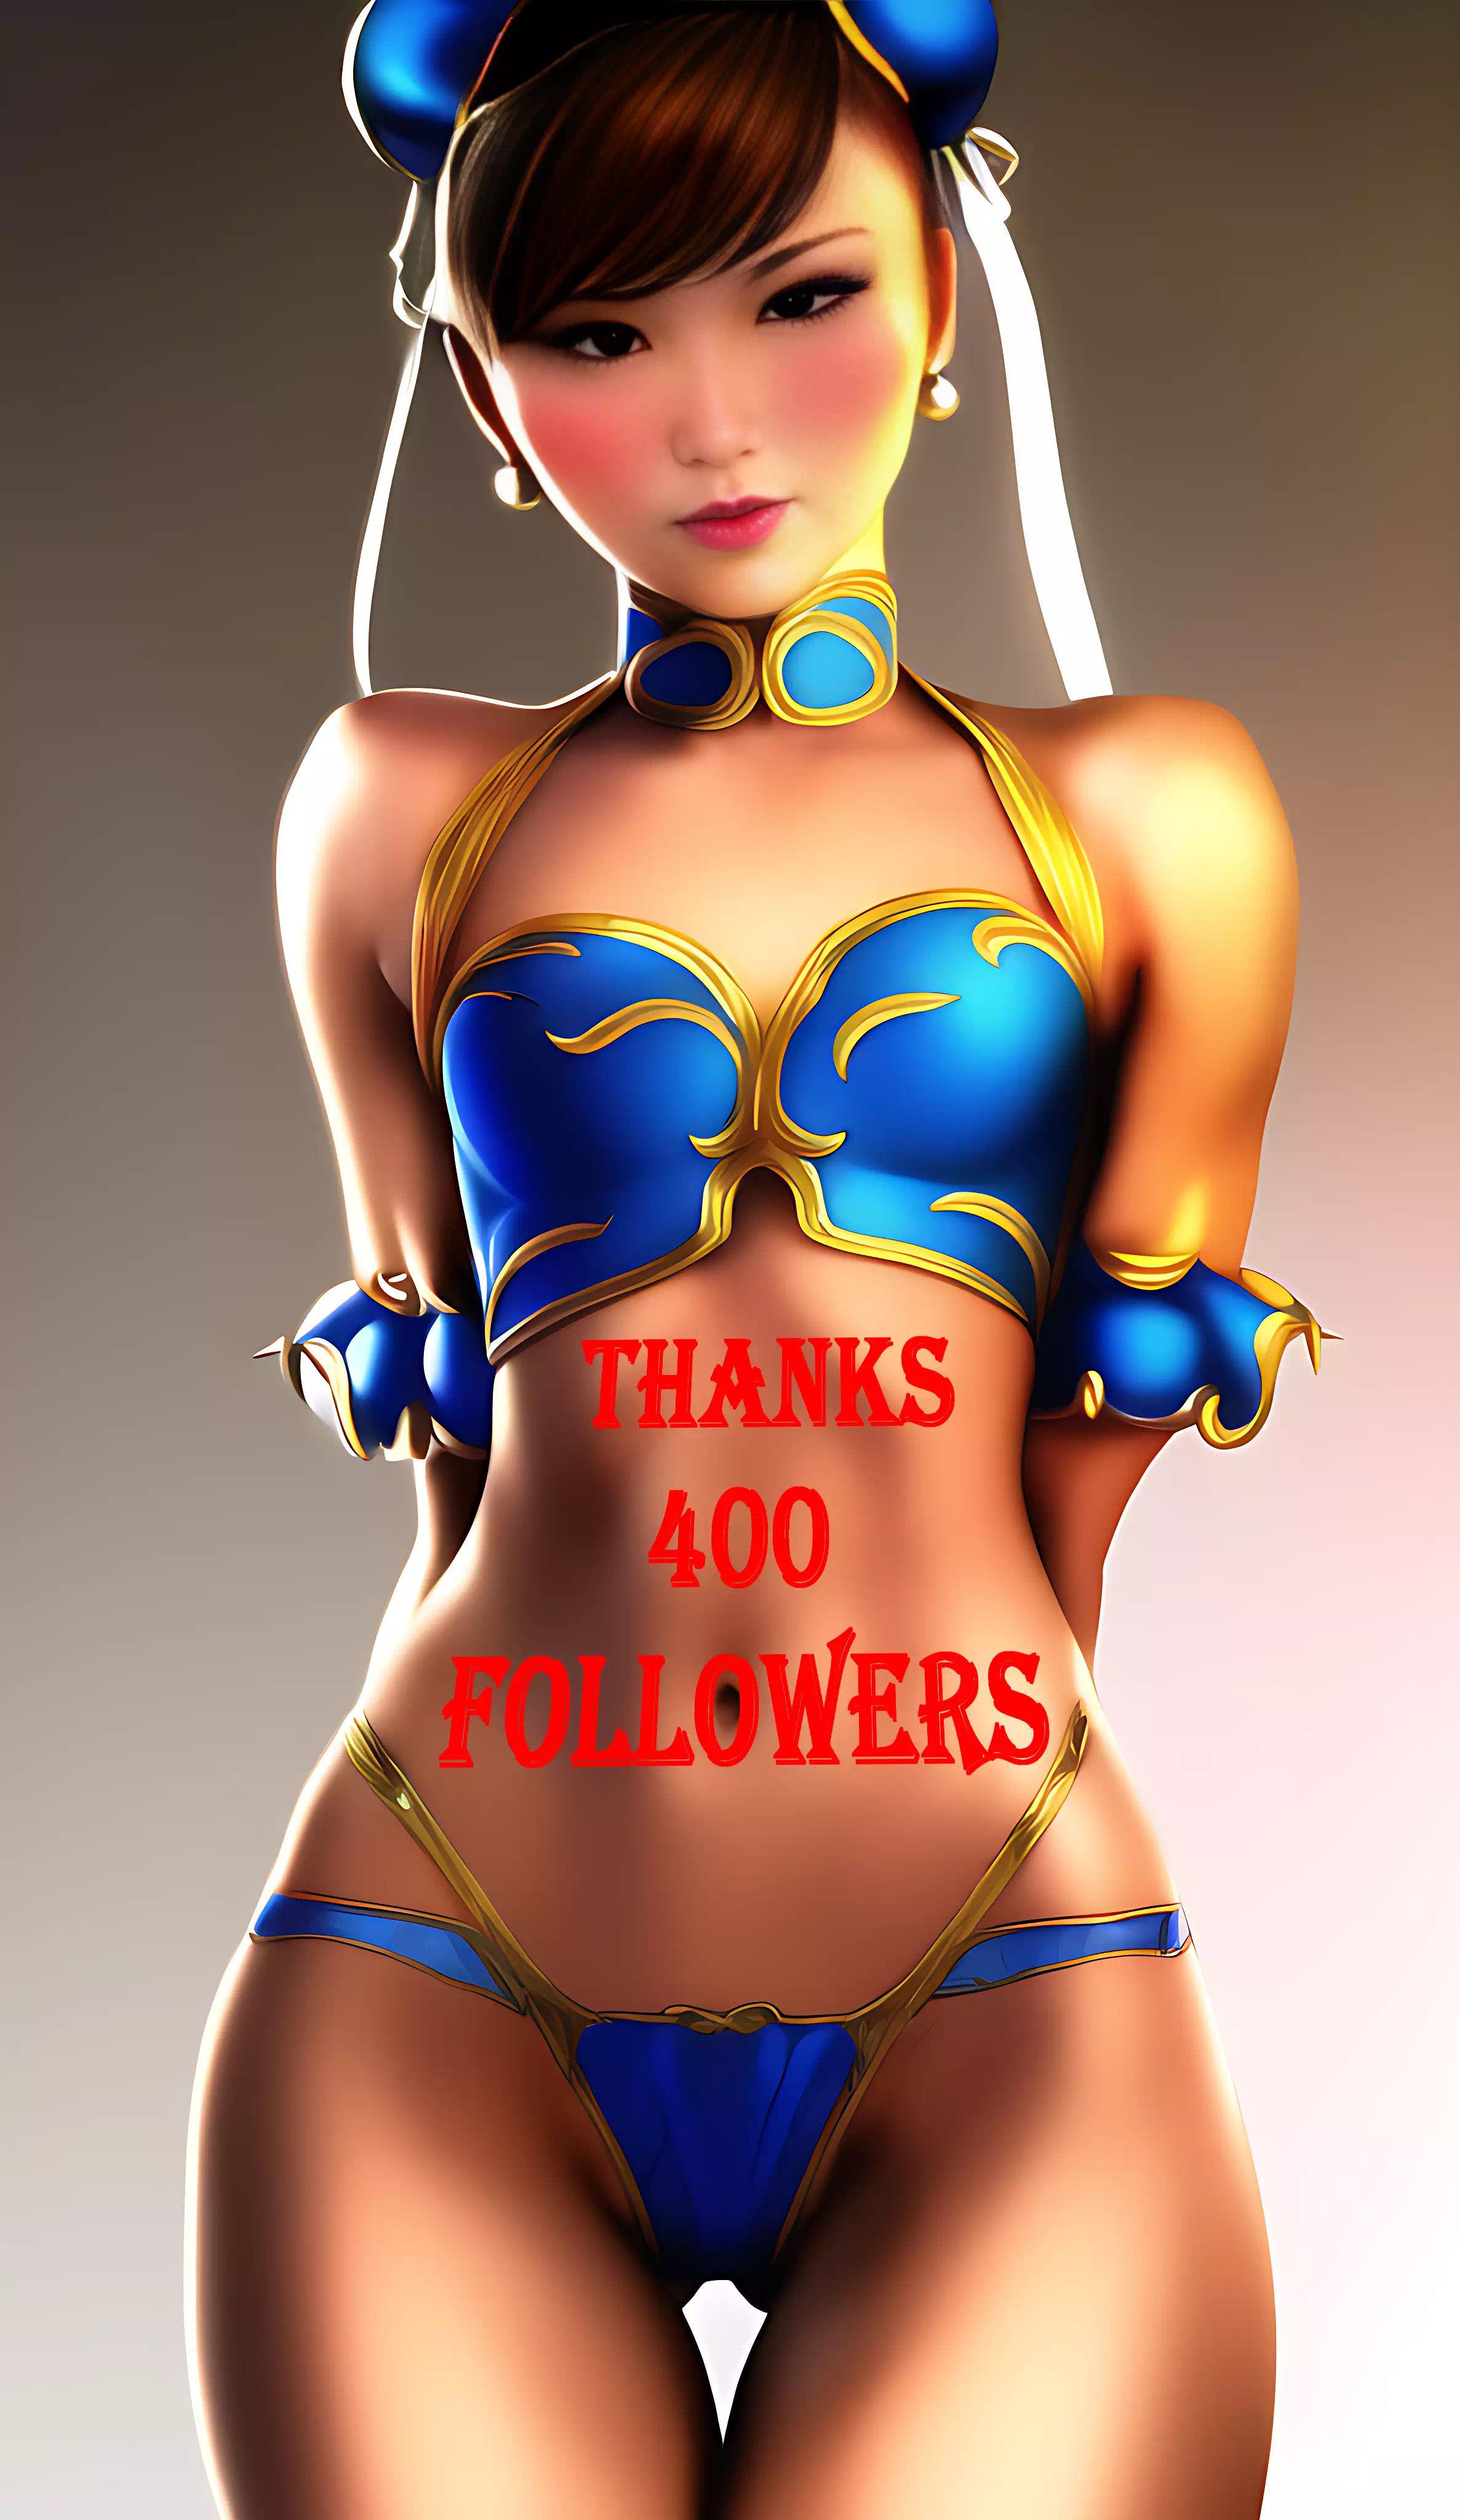 THANKS FOR THE 400 FOLLOWERS